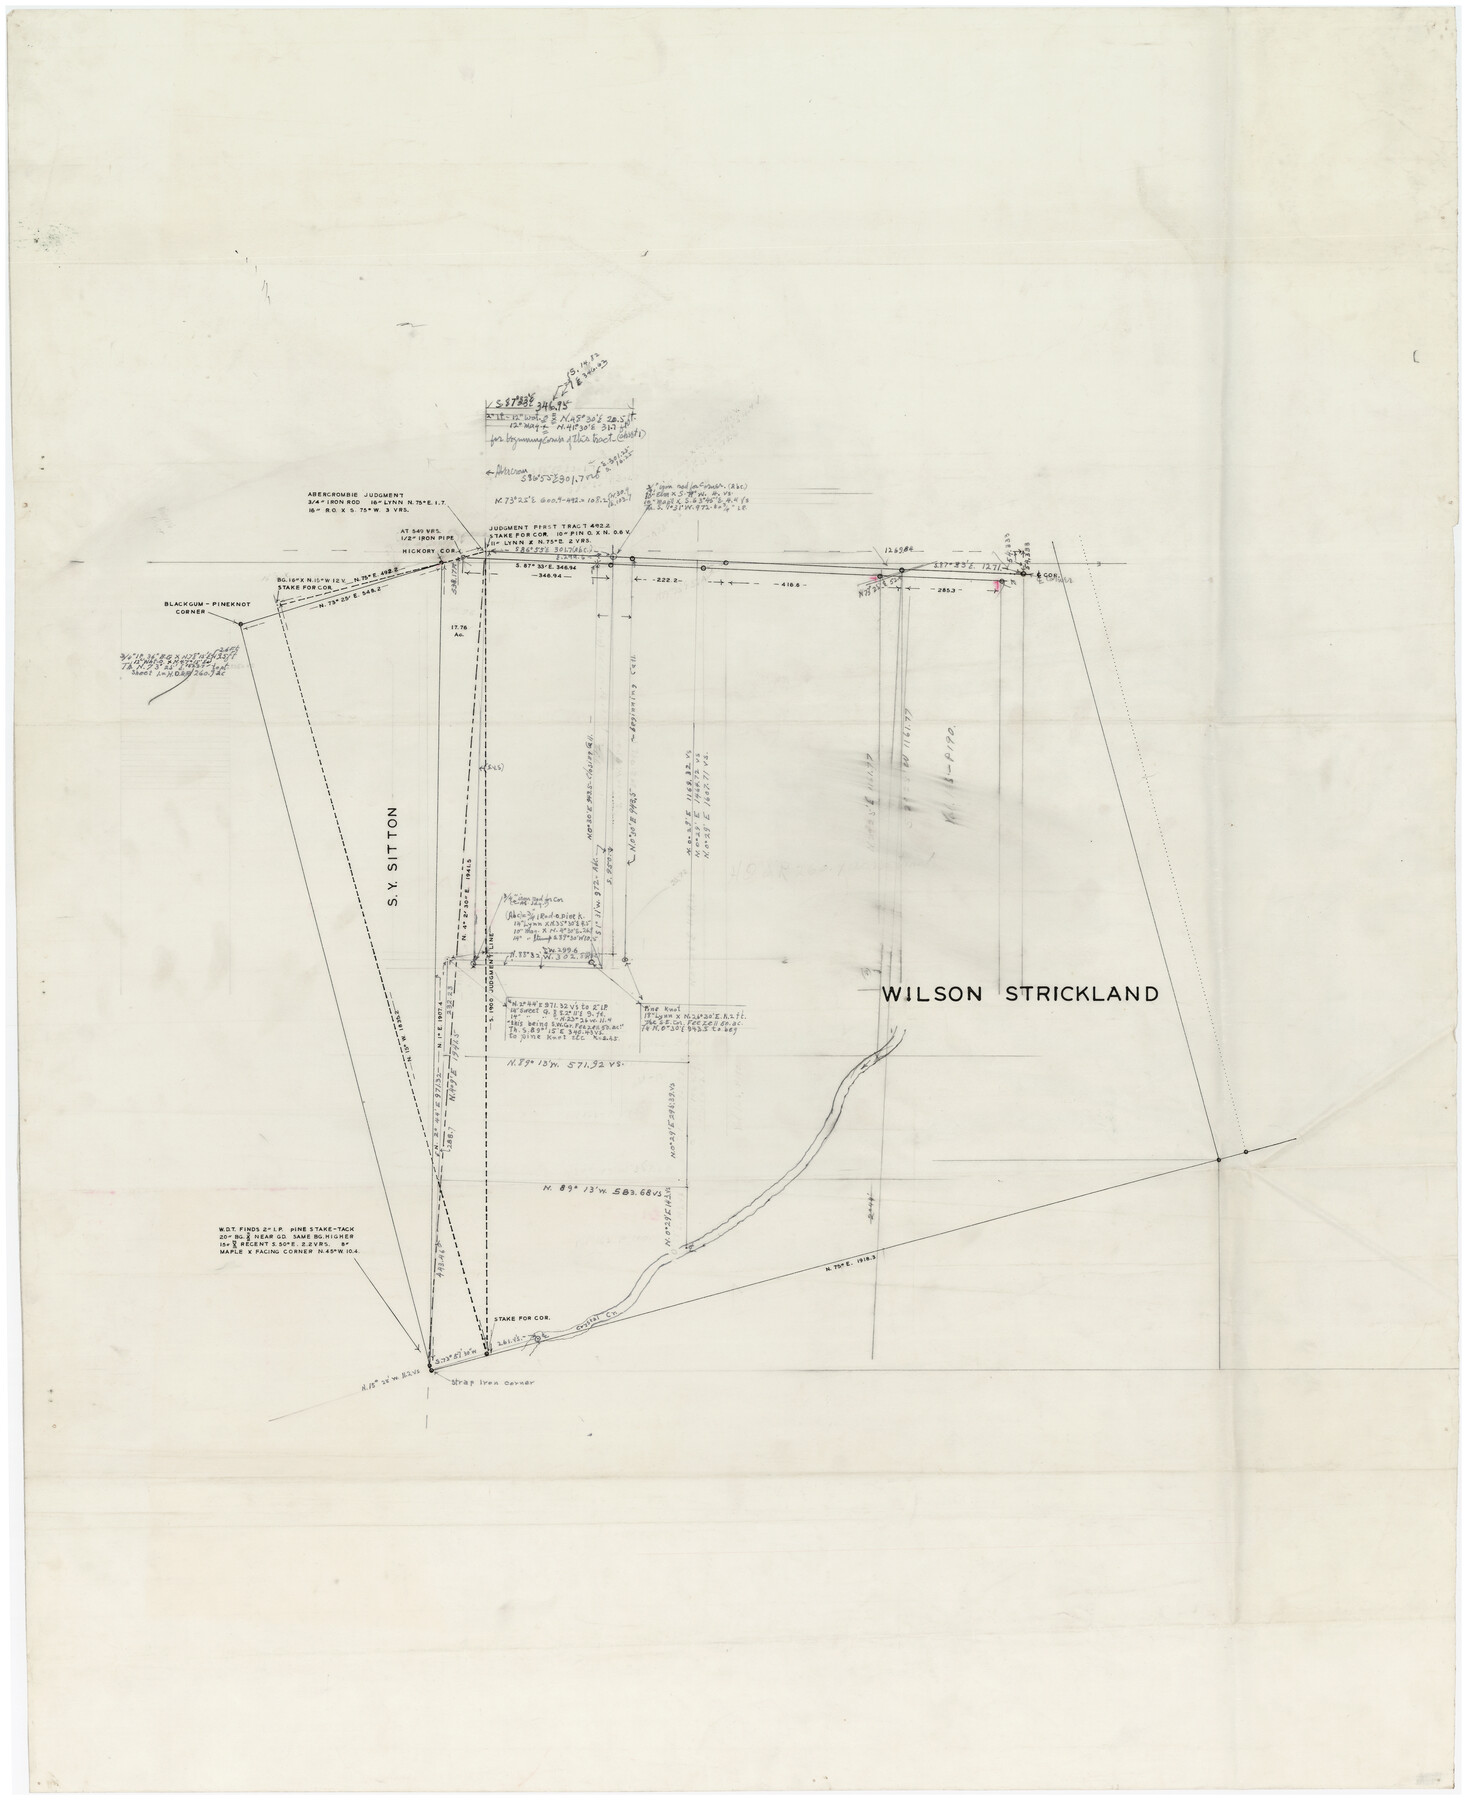 89715, [Vicinity and related to the Wilson Strickland Survey], Twichell Survey Records